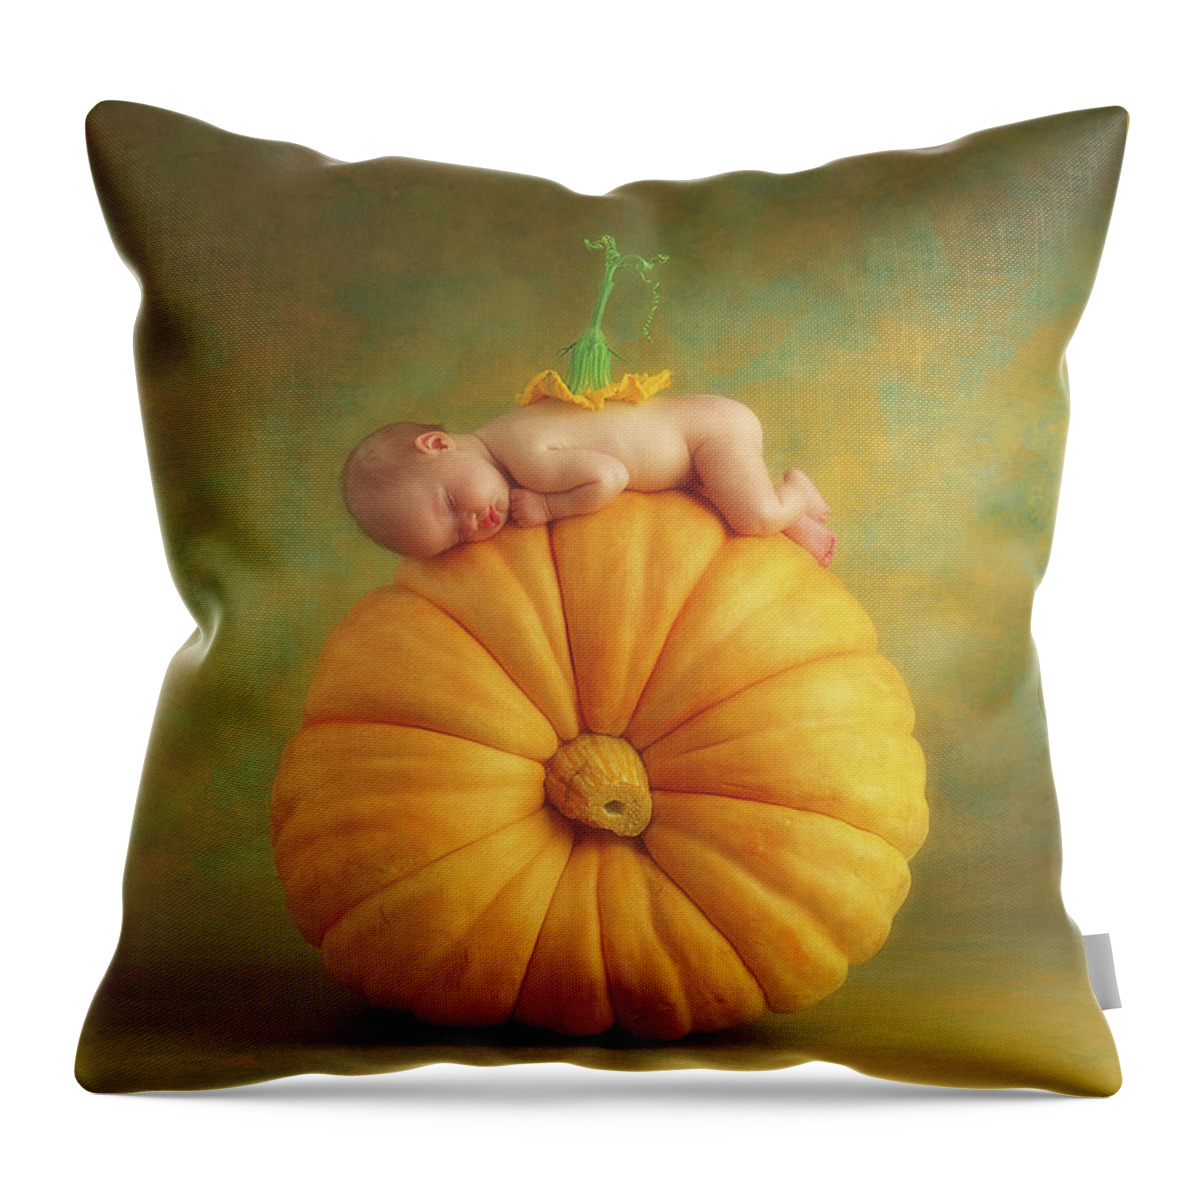 Fall Throw Pillow featuring the photograph Country Pumpkin by Anne Geddes